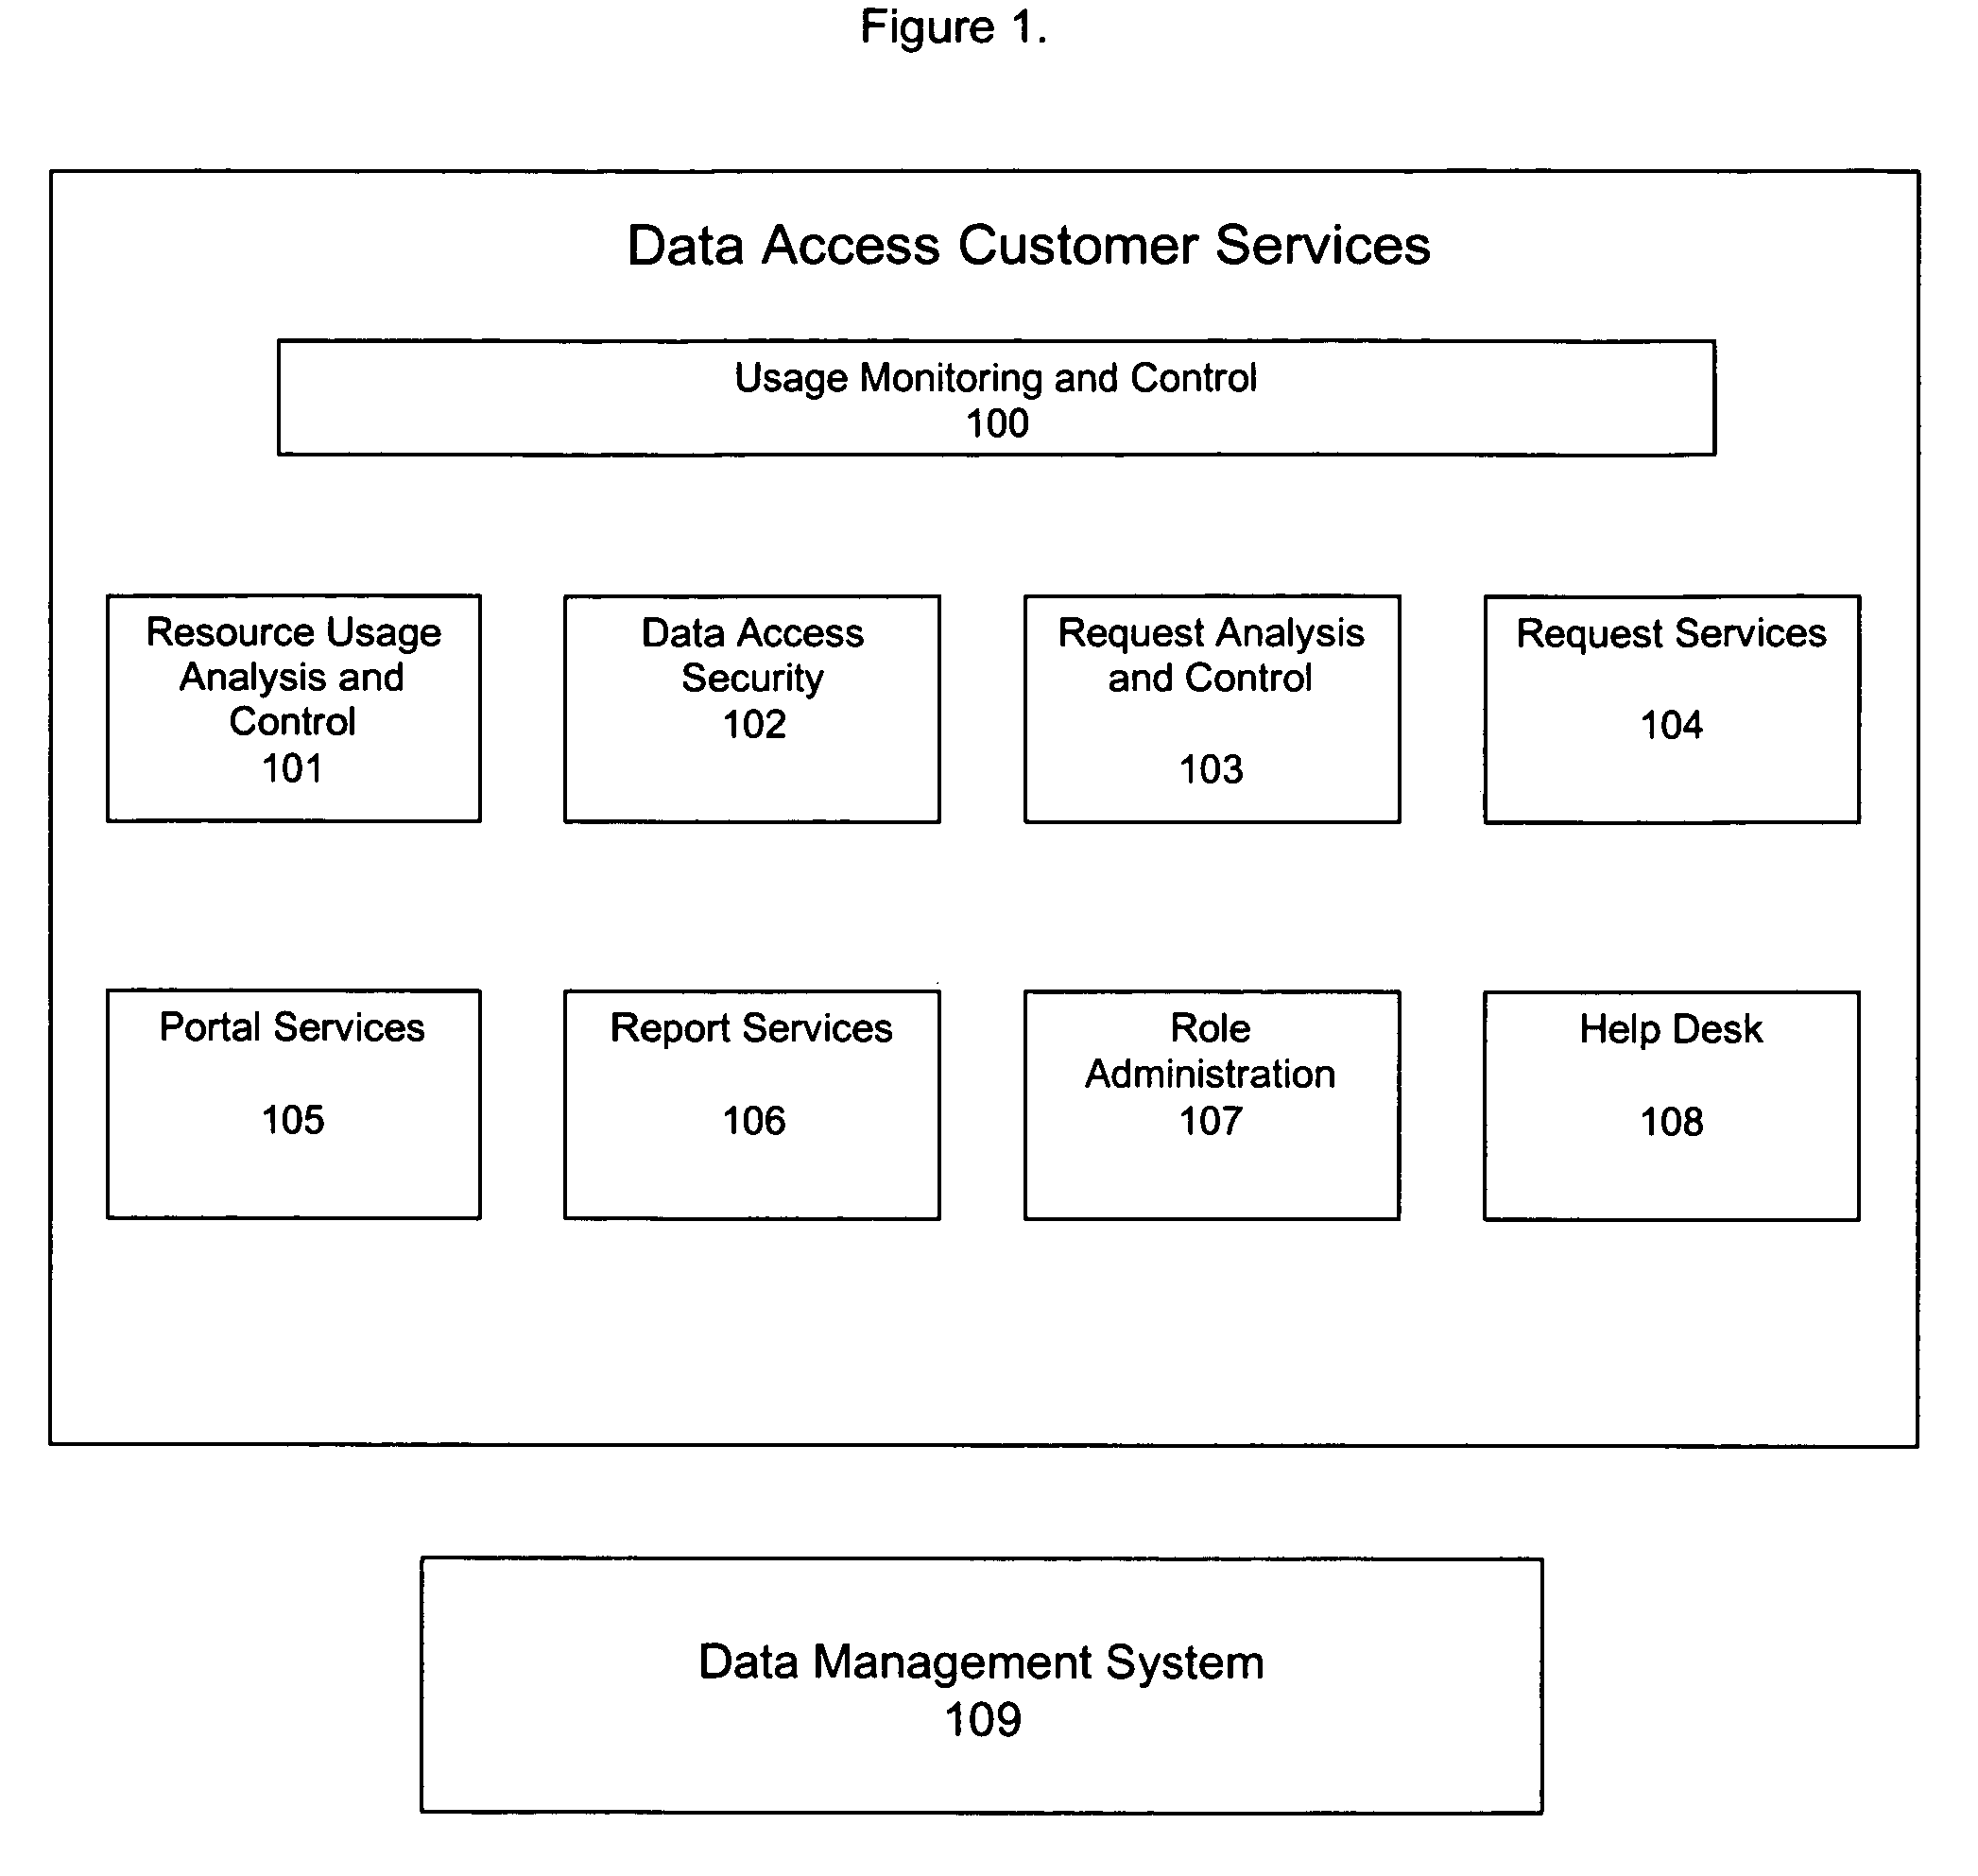 Method and apparatus for optimizing a data access customer service system